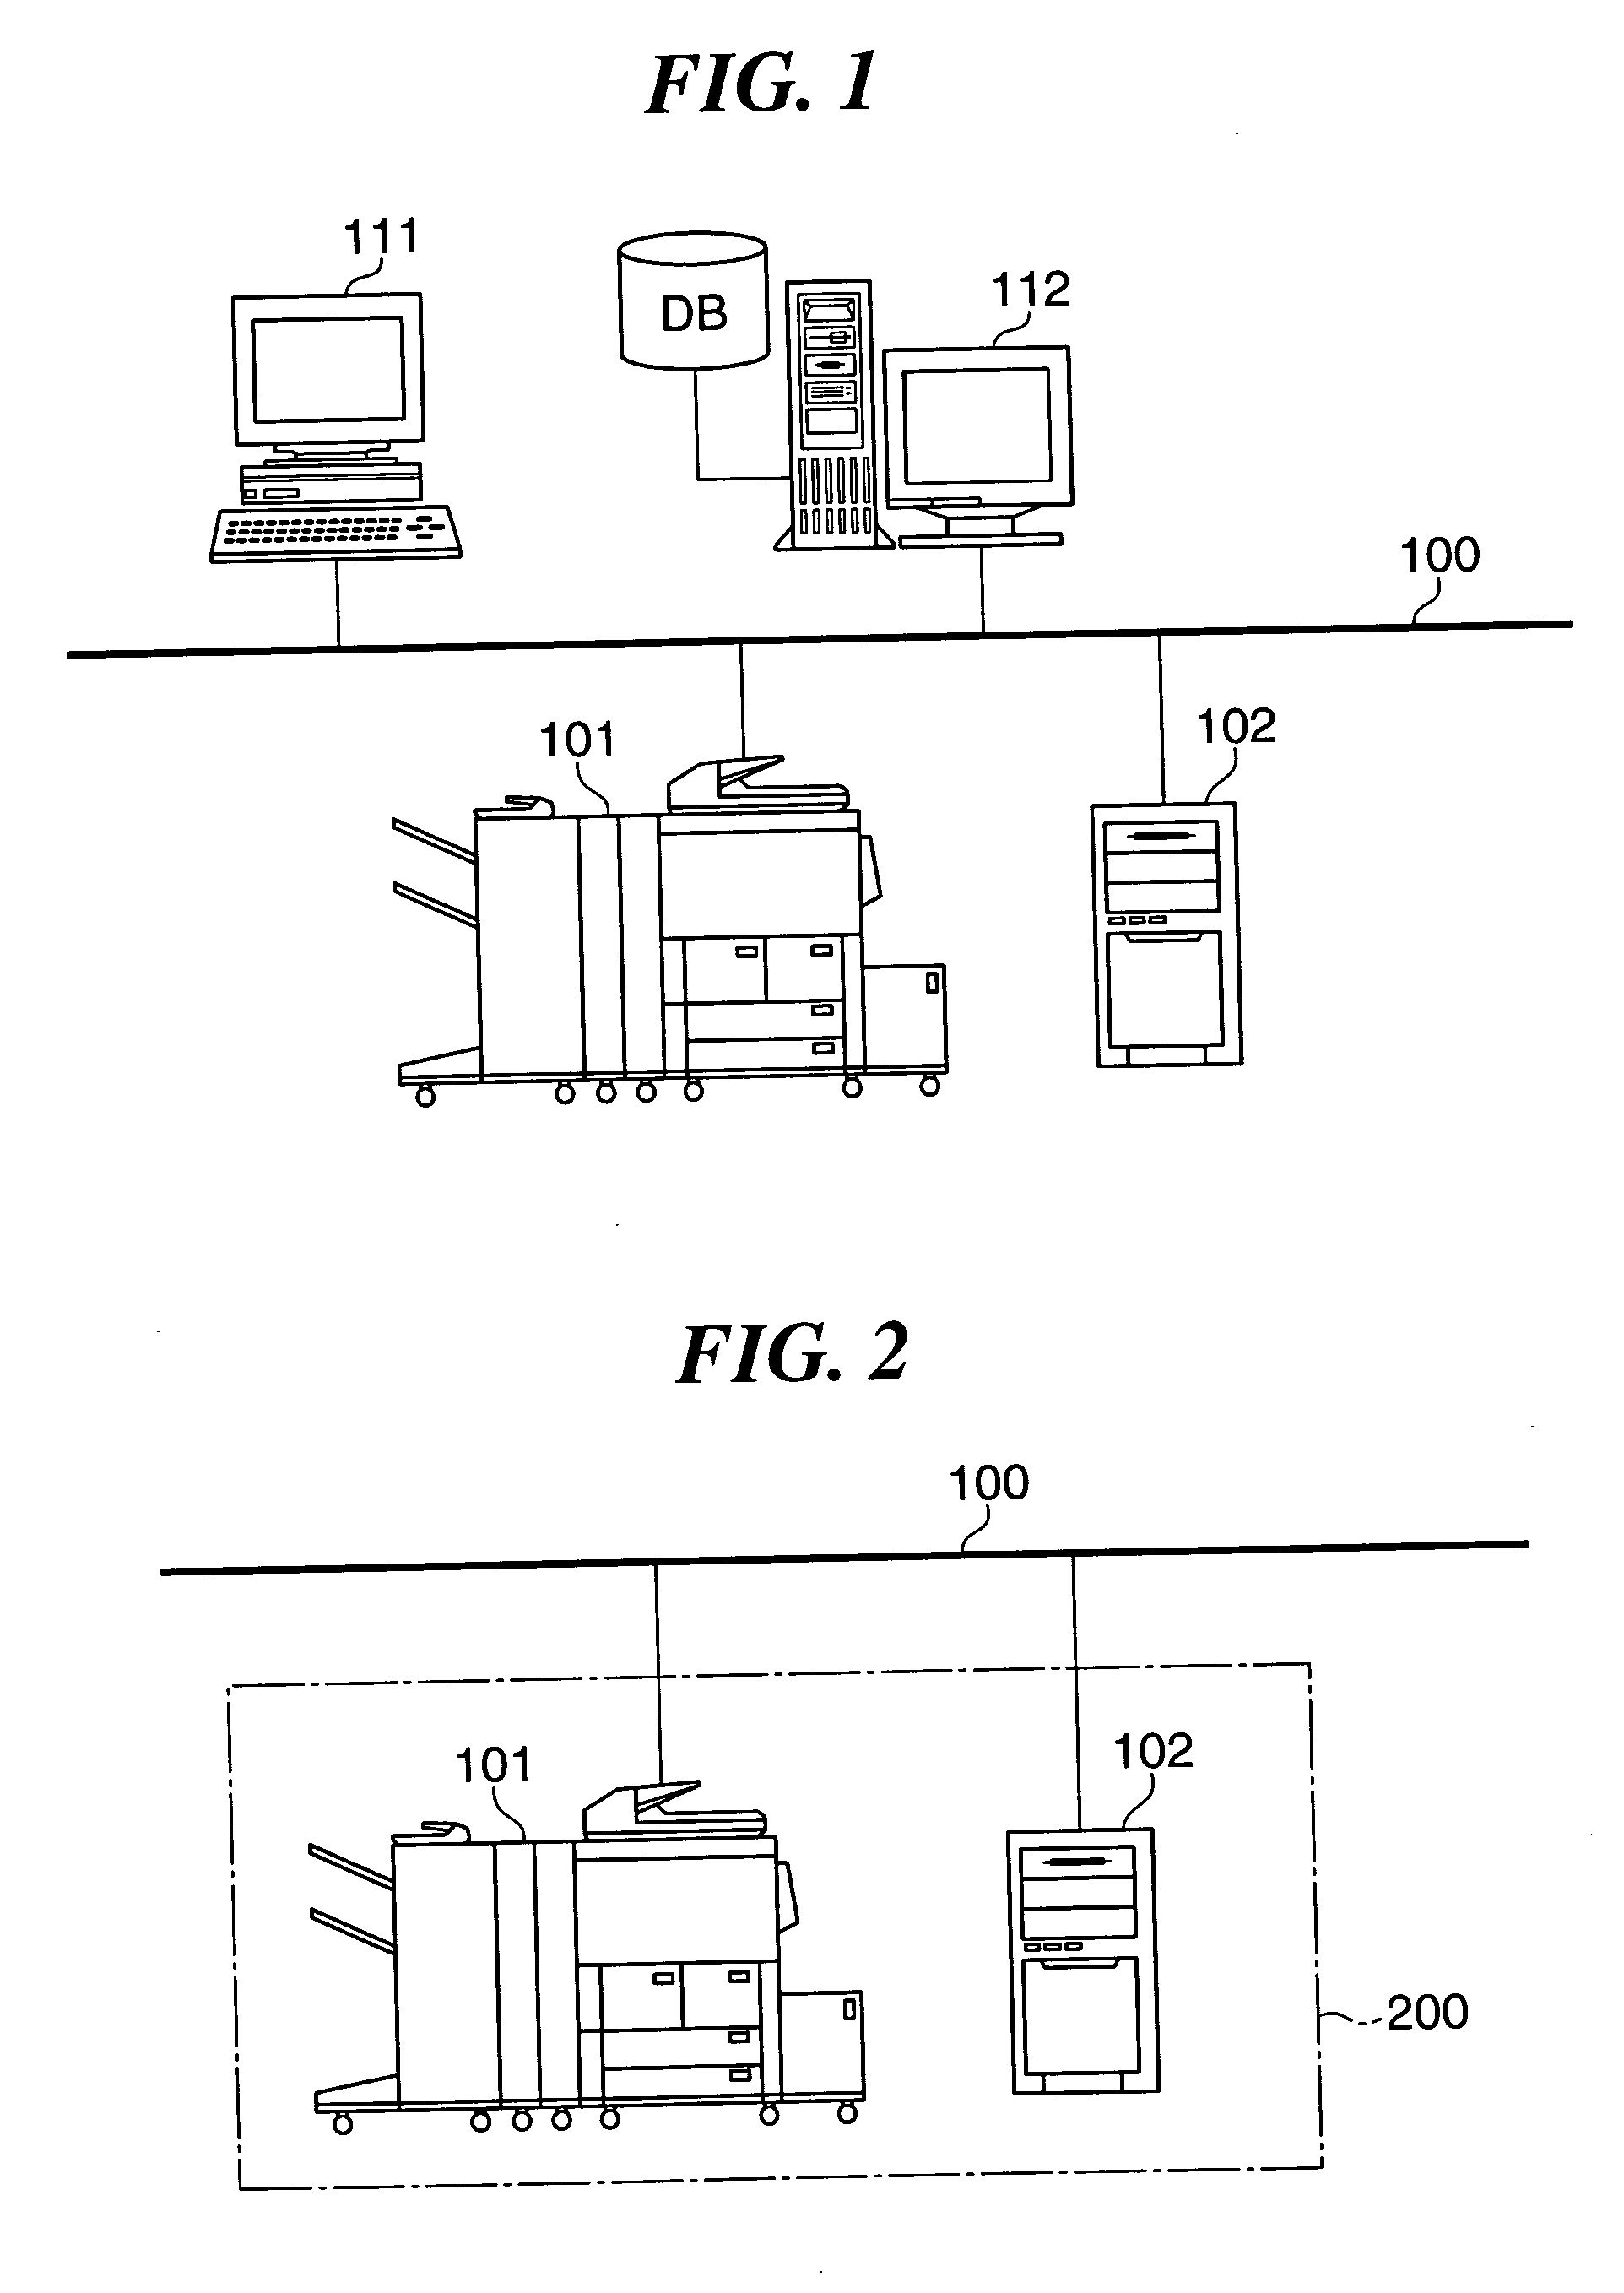 Network device management system, control method therefor, network device, management apparatus, methods carried out thereby, and programs for implementing the methods